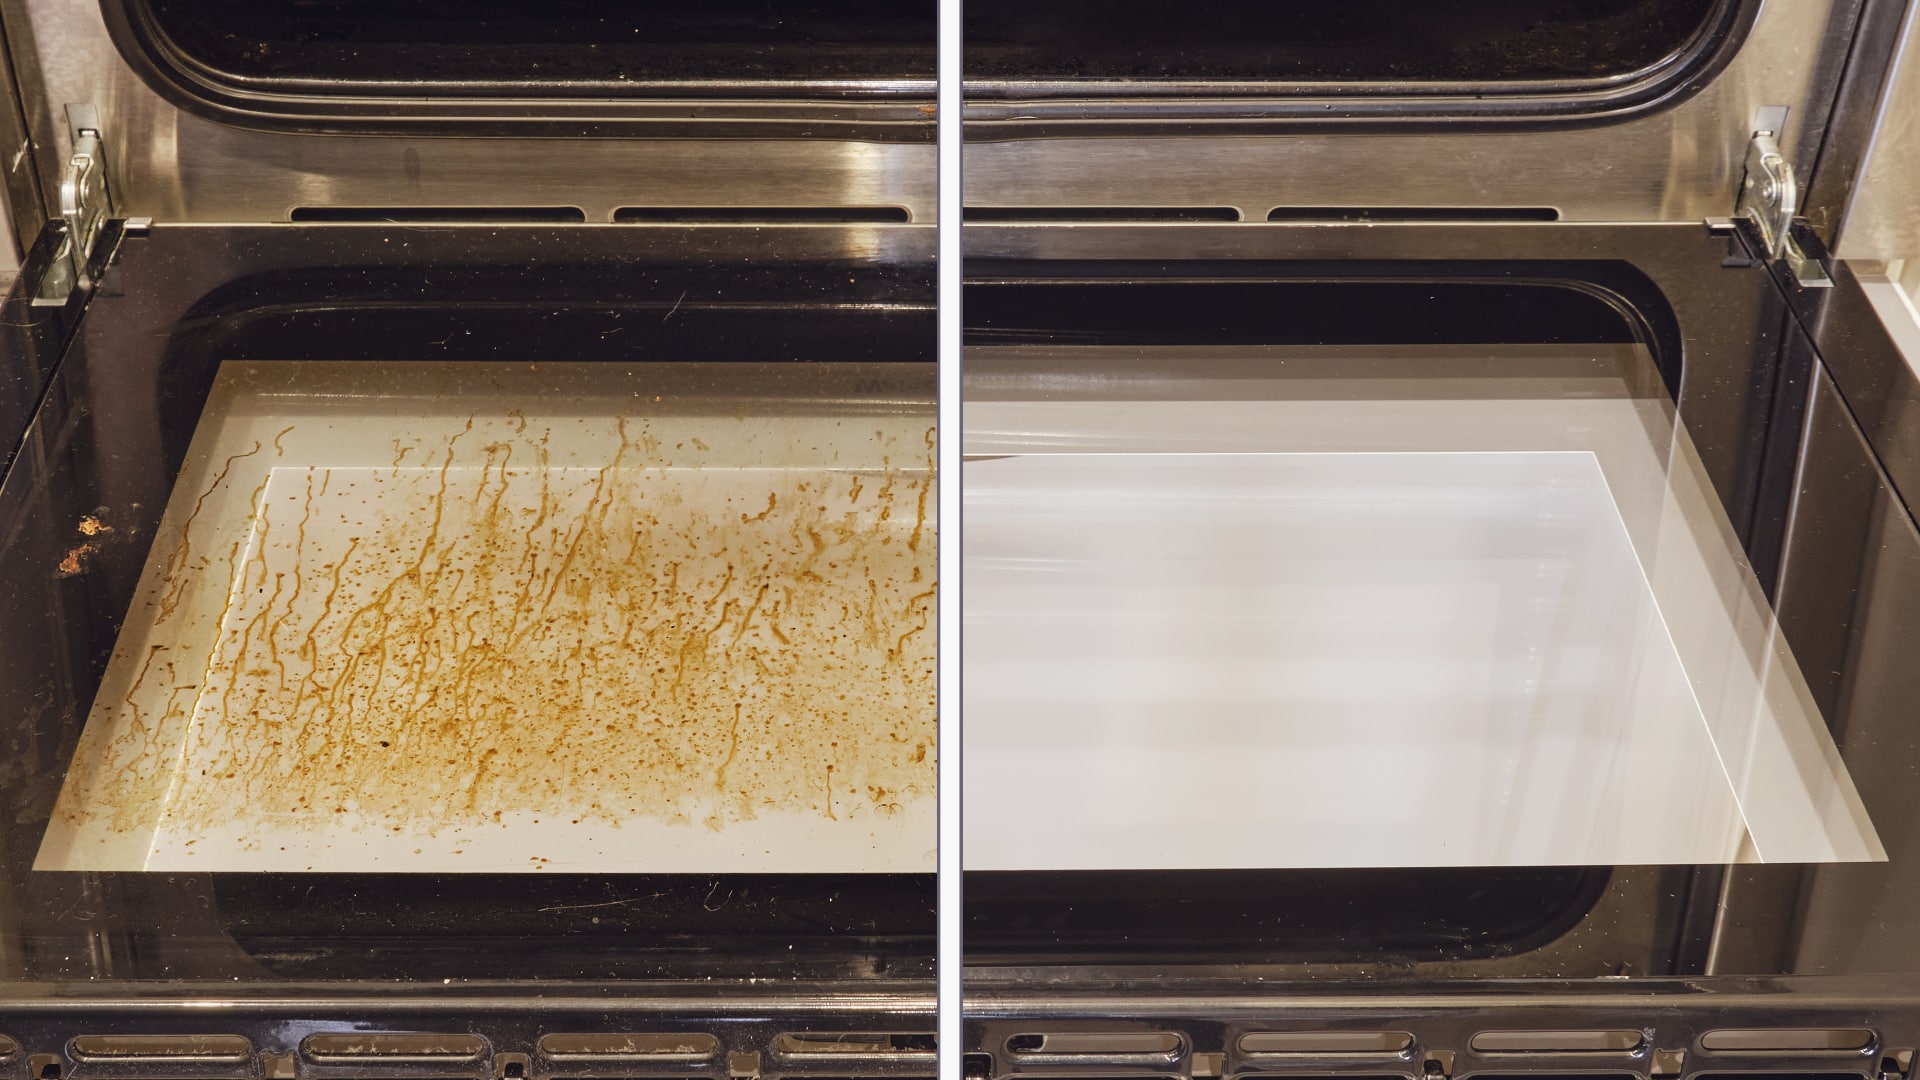 Self-Cleaning vs. Steam-Cleaning Oven: Which Is Right for You